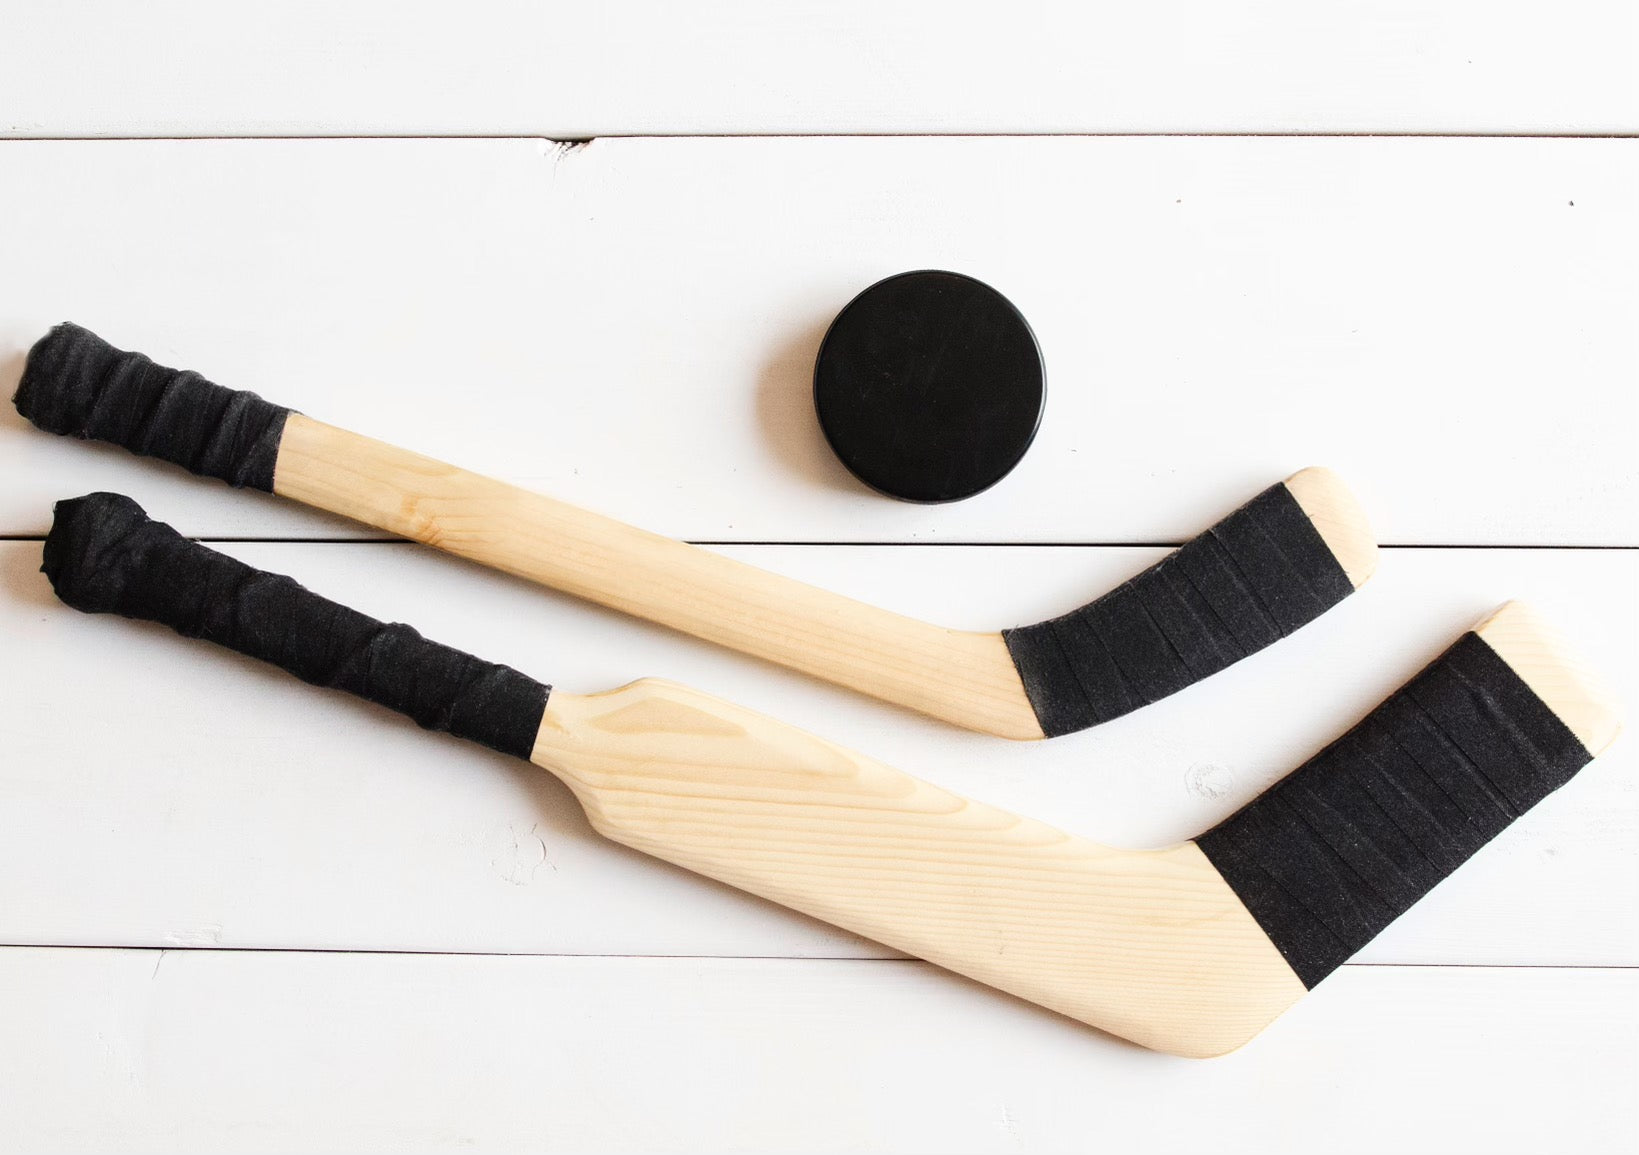 Wooden Play Hockey Sticks by BHive Woodworking